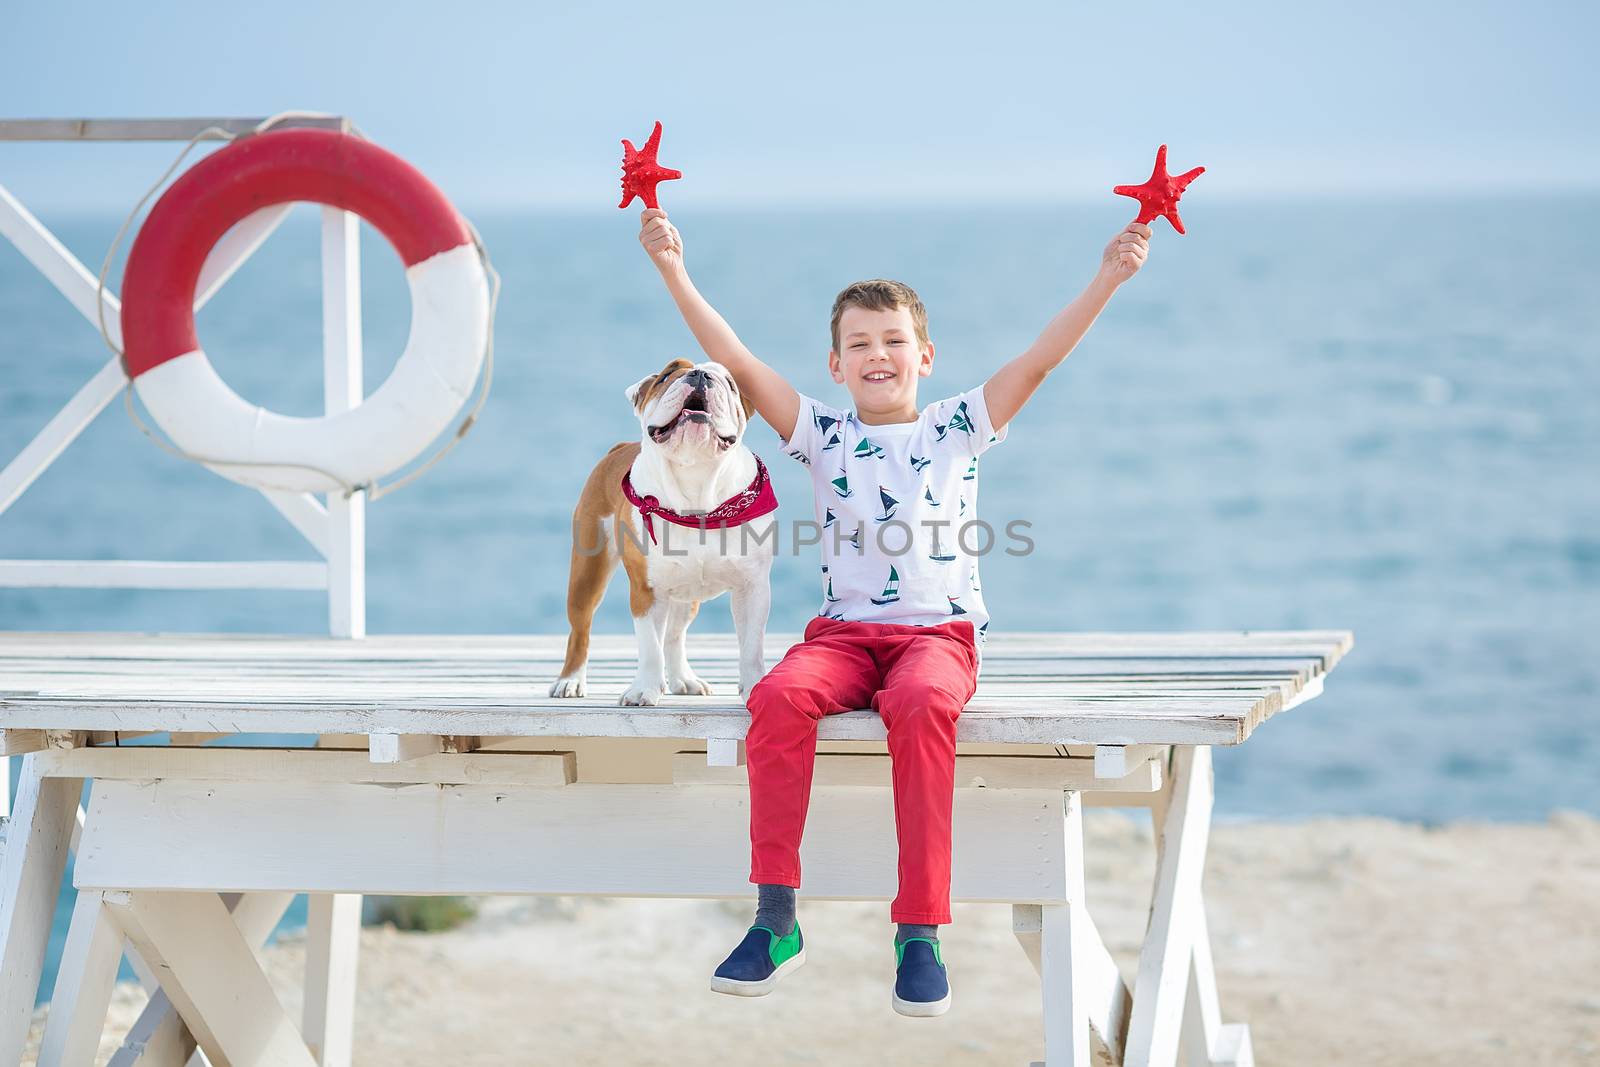 Handsome boy teen happyly spending time together with his friend bulldog on sea side Kid dog holding playing two sea stars close to life buoy float wearing red pants trousers slippers and t-shirt by dlukashenko@mail.ru